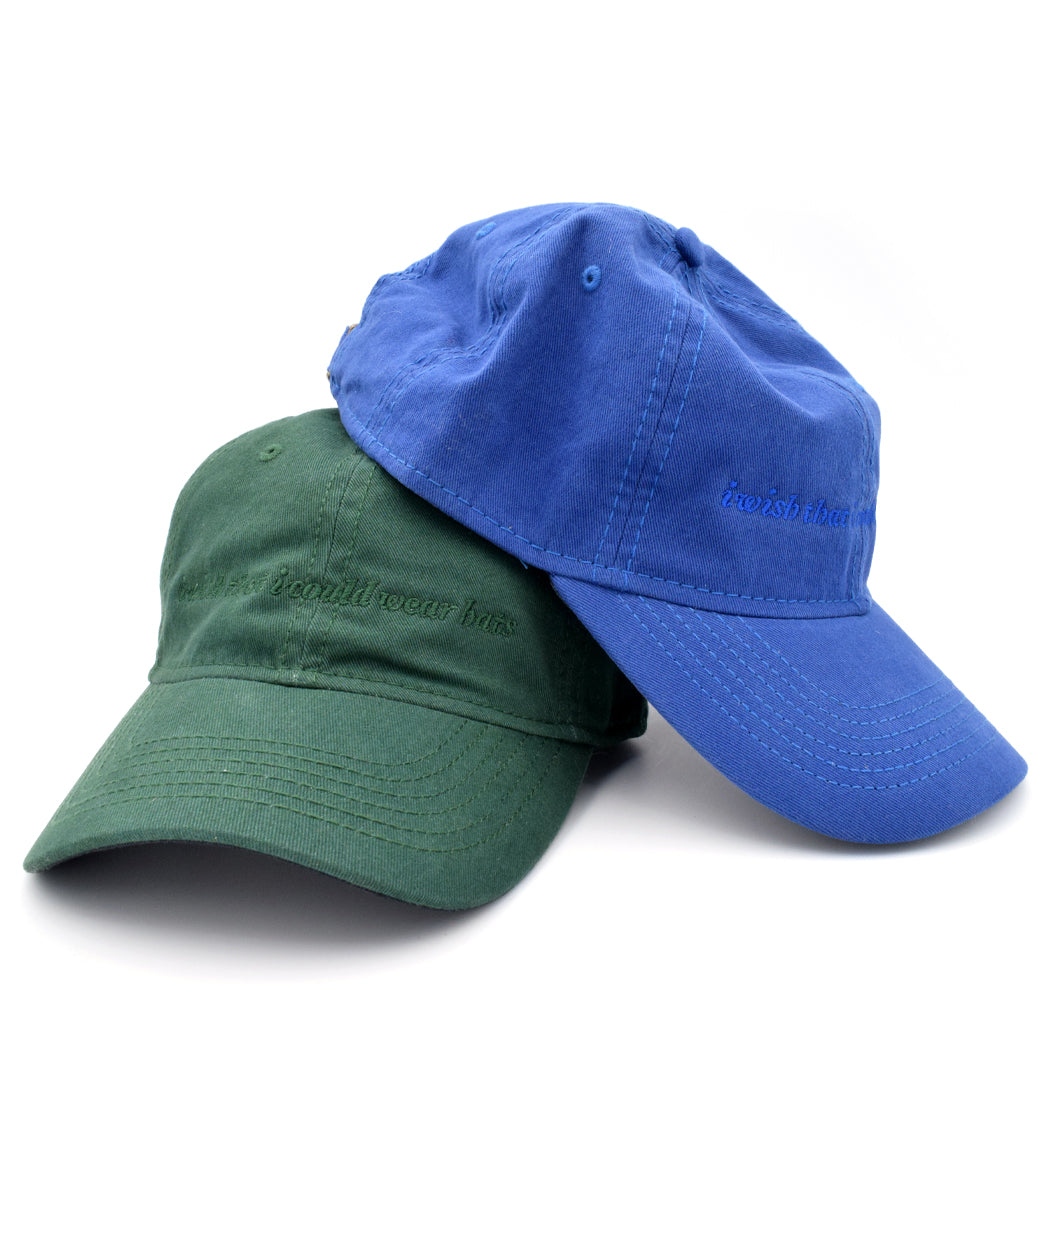 A  blue ball cap stacked on top of a green one. Both with lowercase embroidered words saying "i wish that i could wear hats". From Brian David Gilbert. 